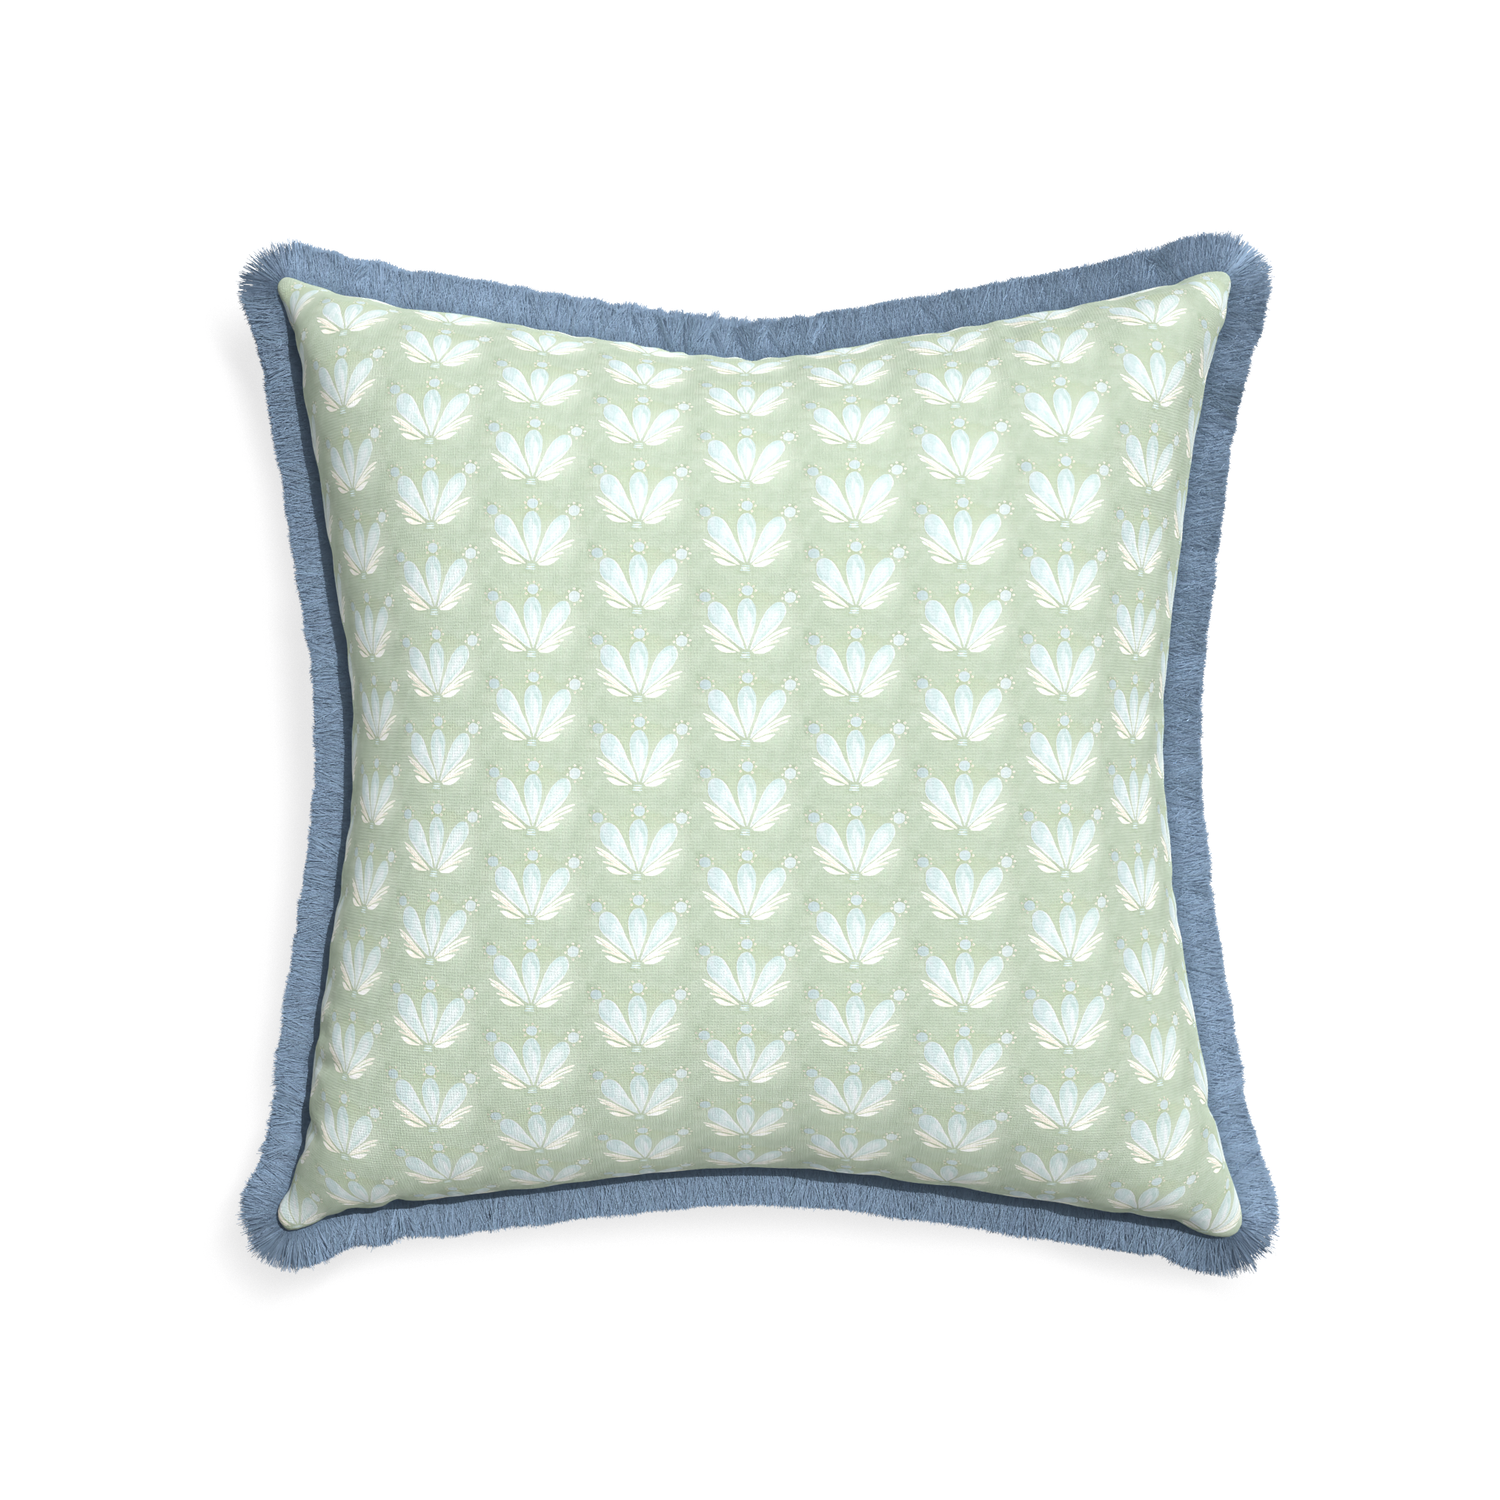 22-square serena sea salt custom blue & green floral drop repeatpillow with sky fringe on white background